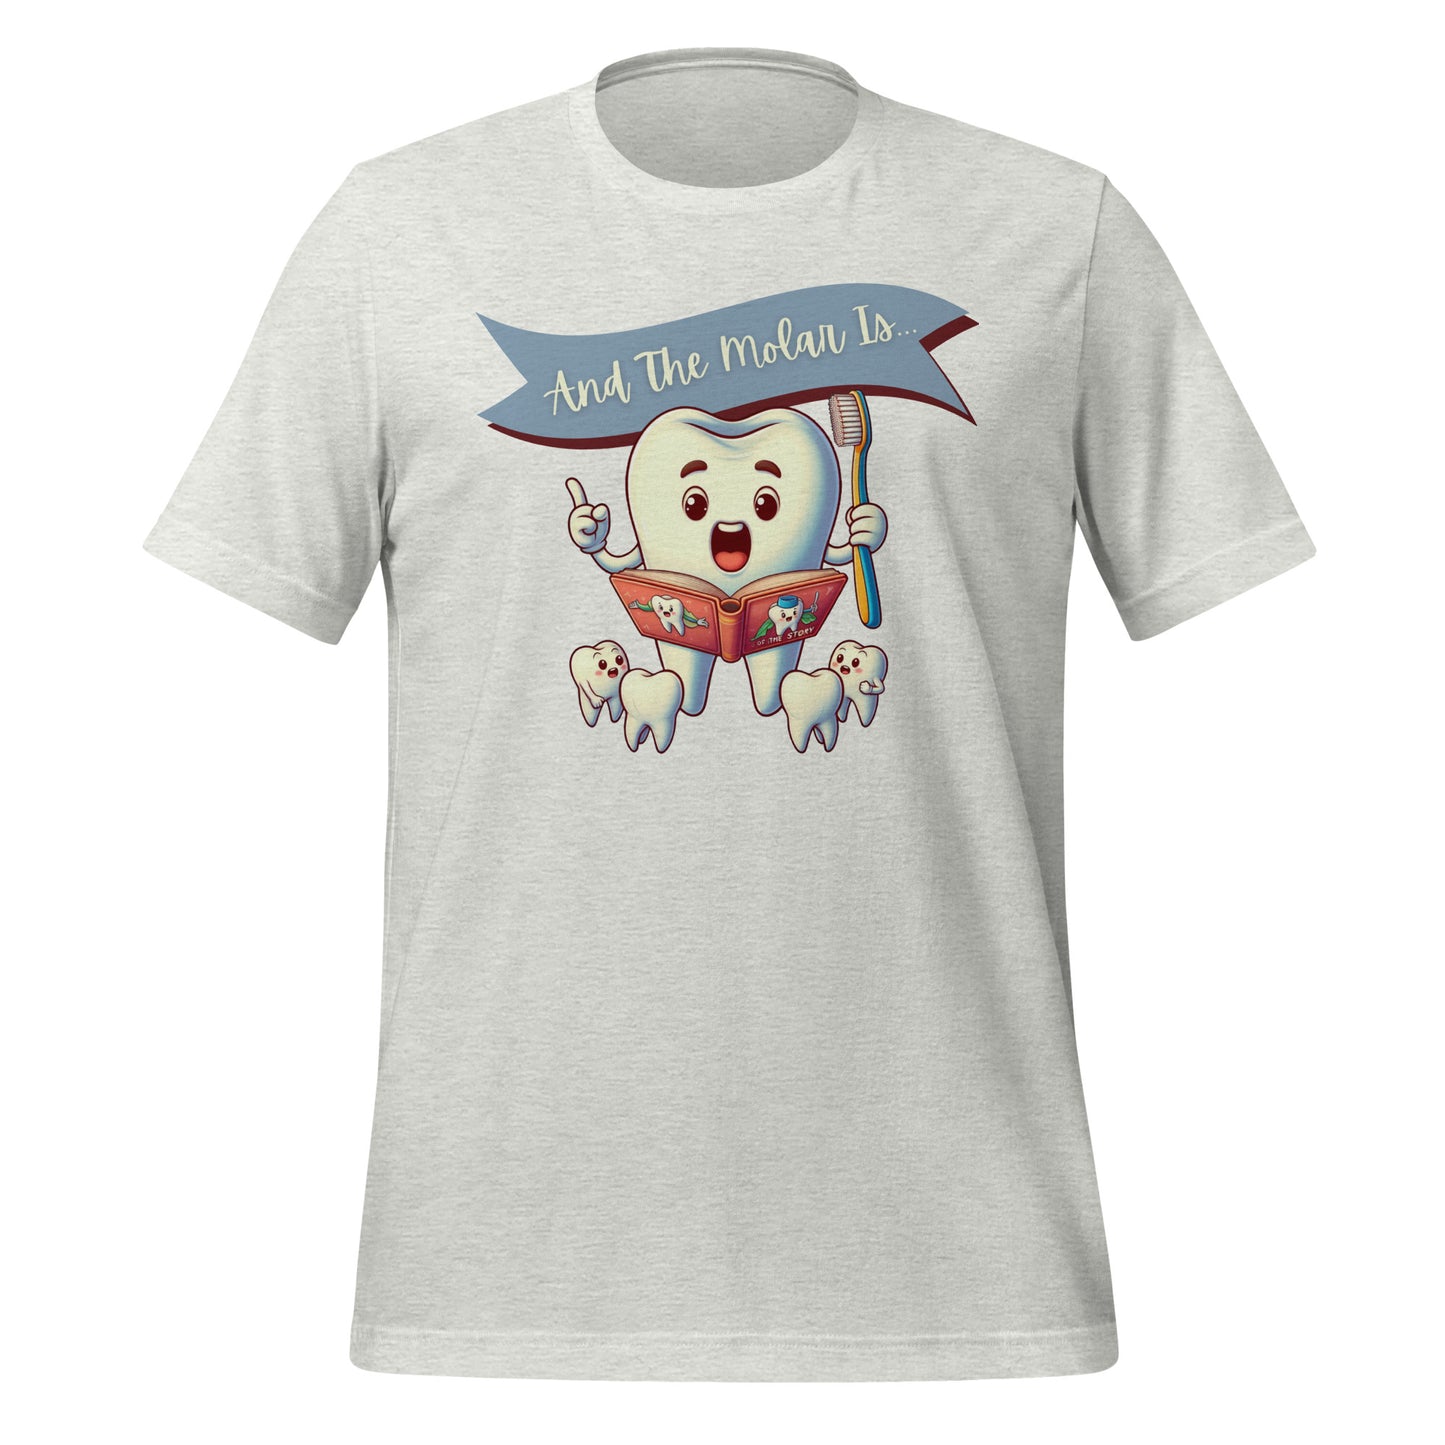 Cute dental shirt featuring a smiling tooth character reading a book with the caption ‘And The Molar Is,’ surrounded by smaller tooth characters. Ash color.